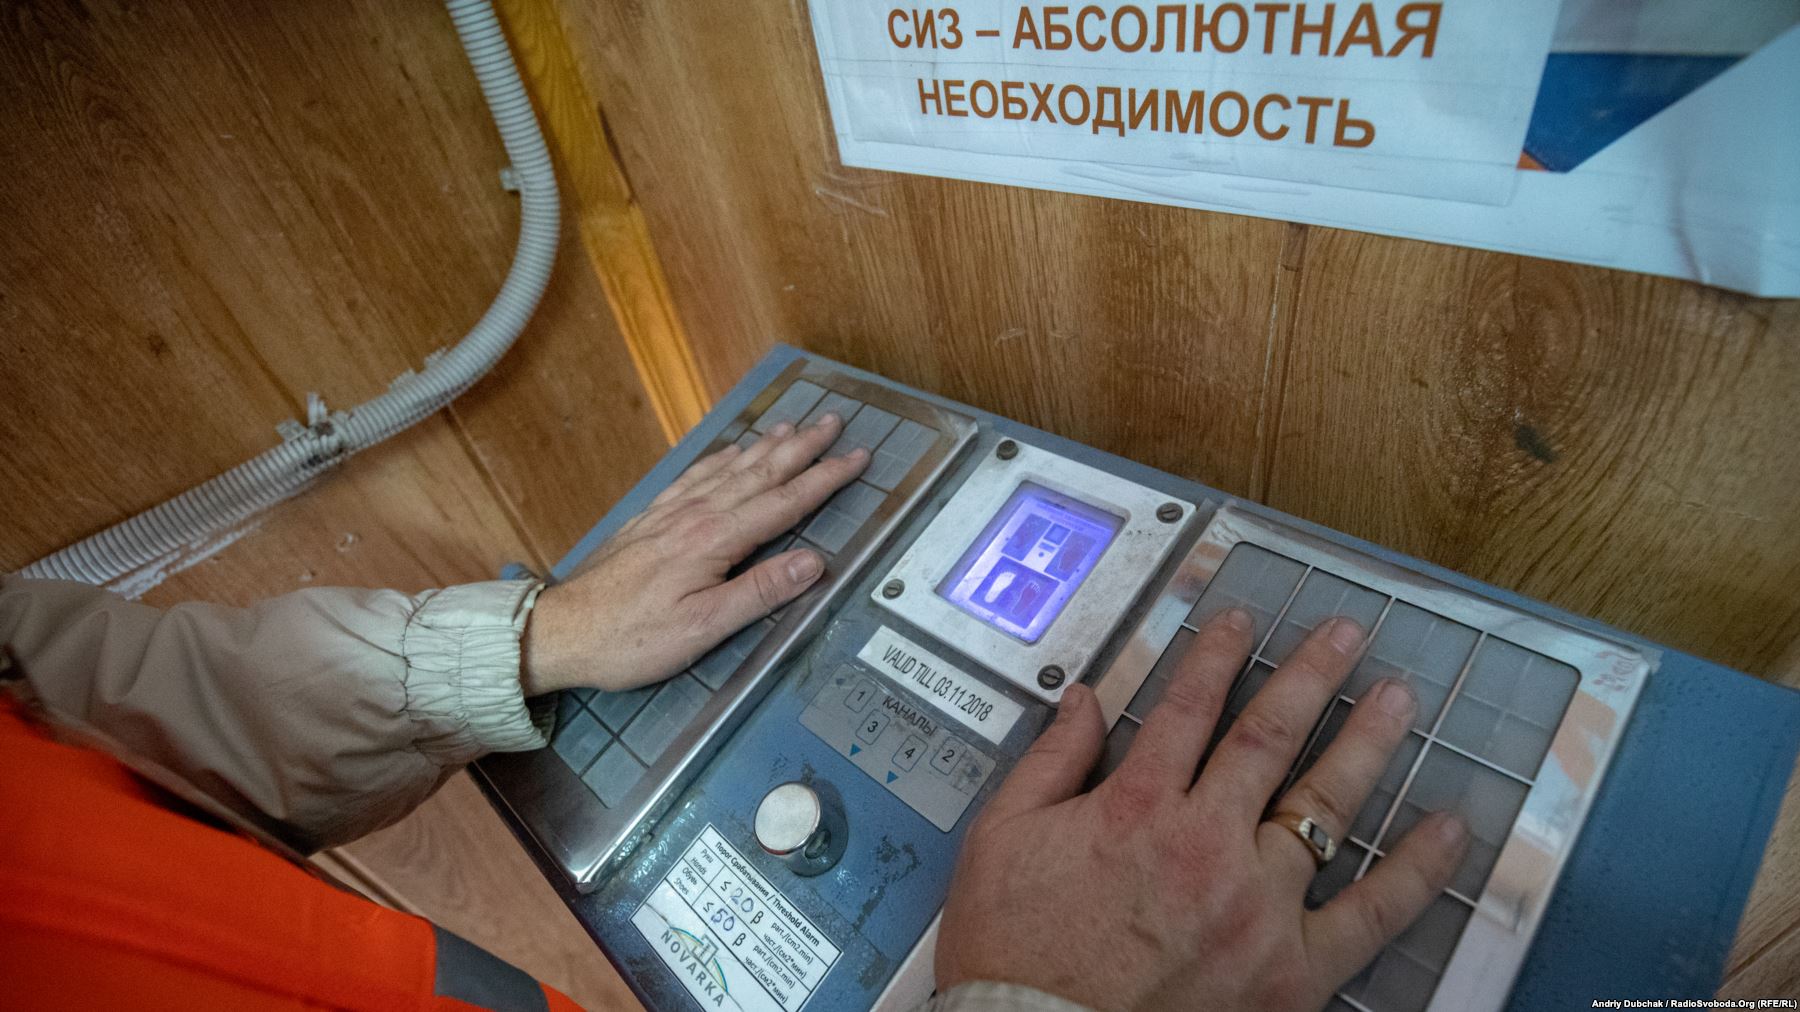 Workers and visitors must test their radiation levels before being allowed to leave Chernobyl's New Safe Confinement (NSC). Photo by: Andriy Dubchak